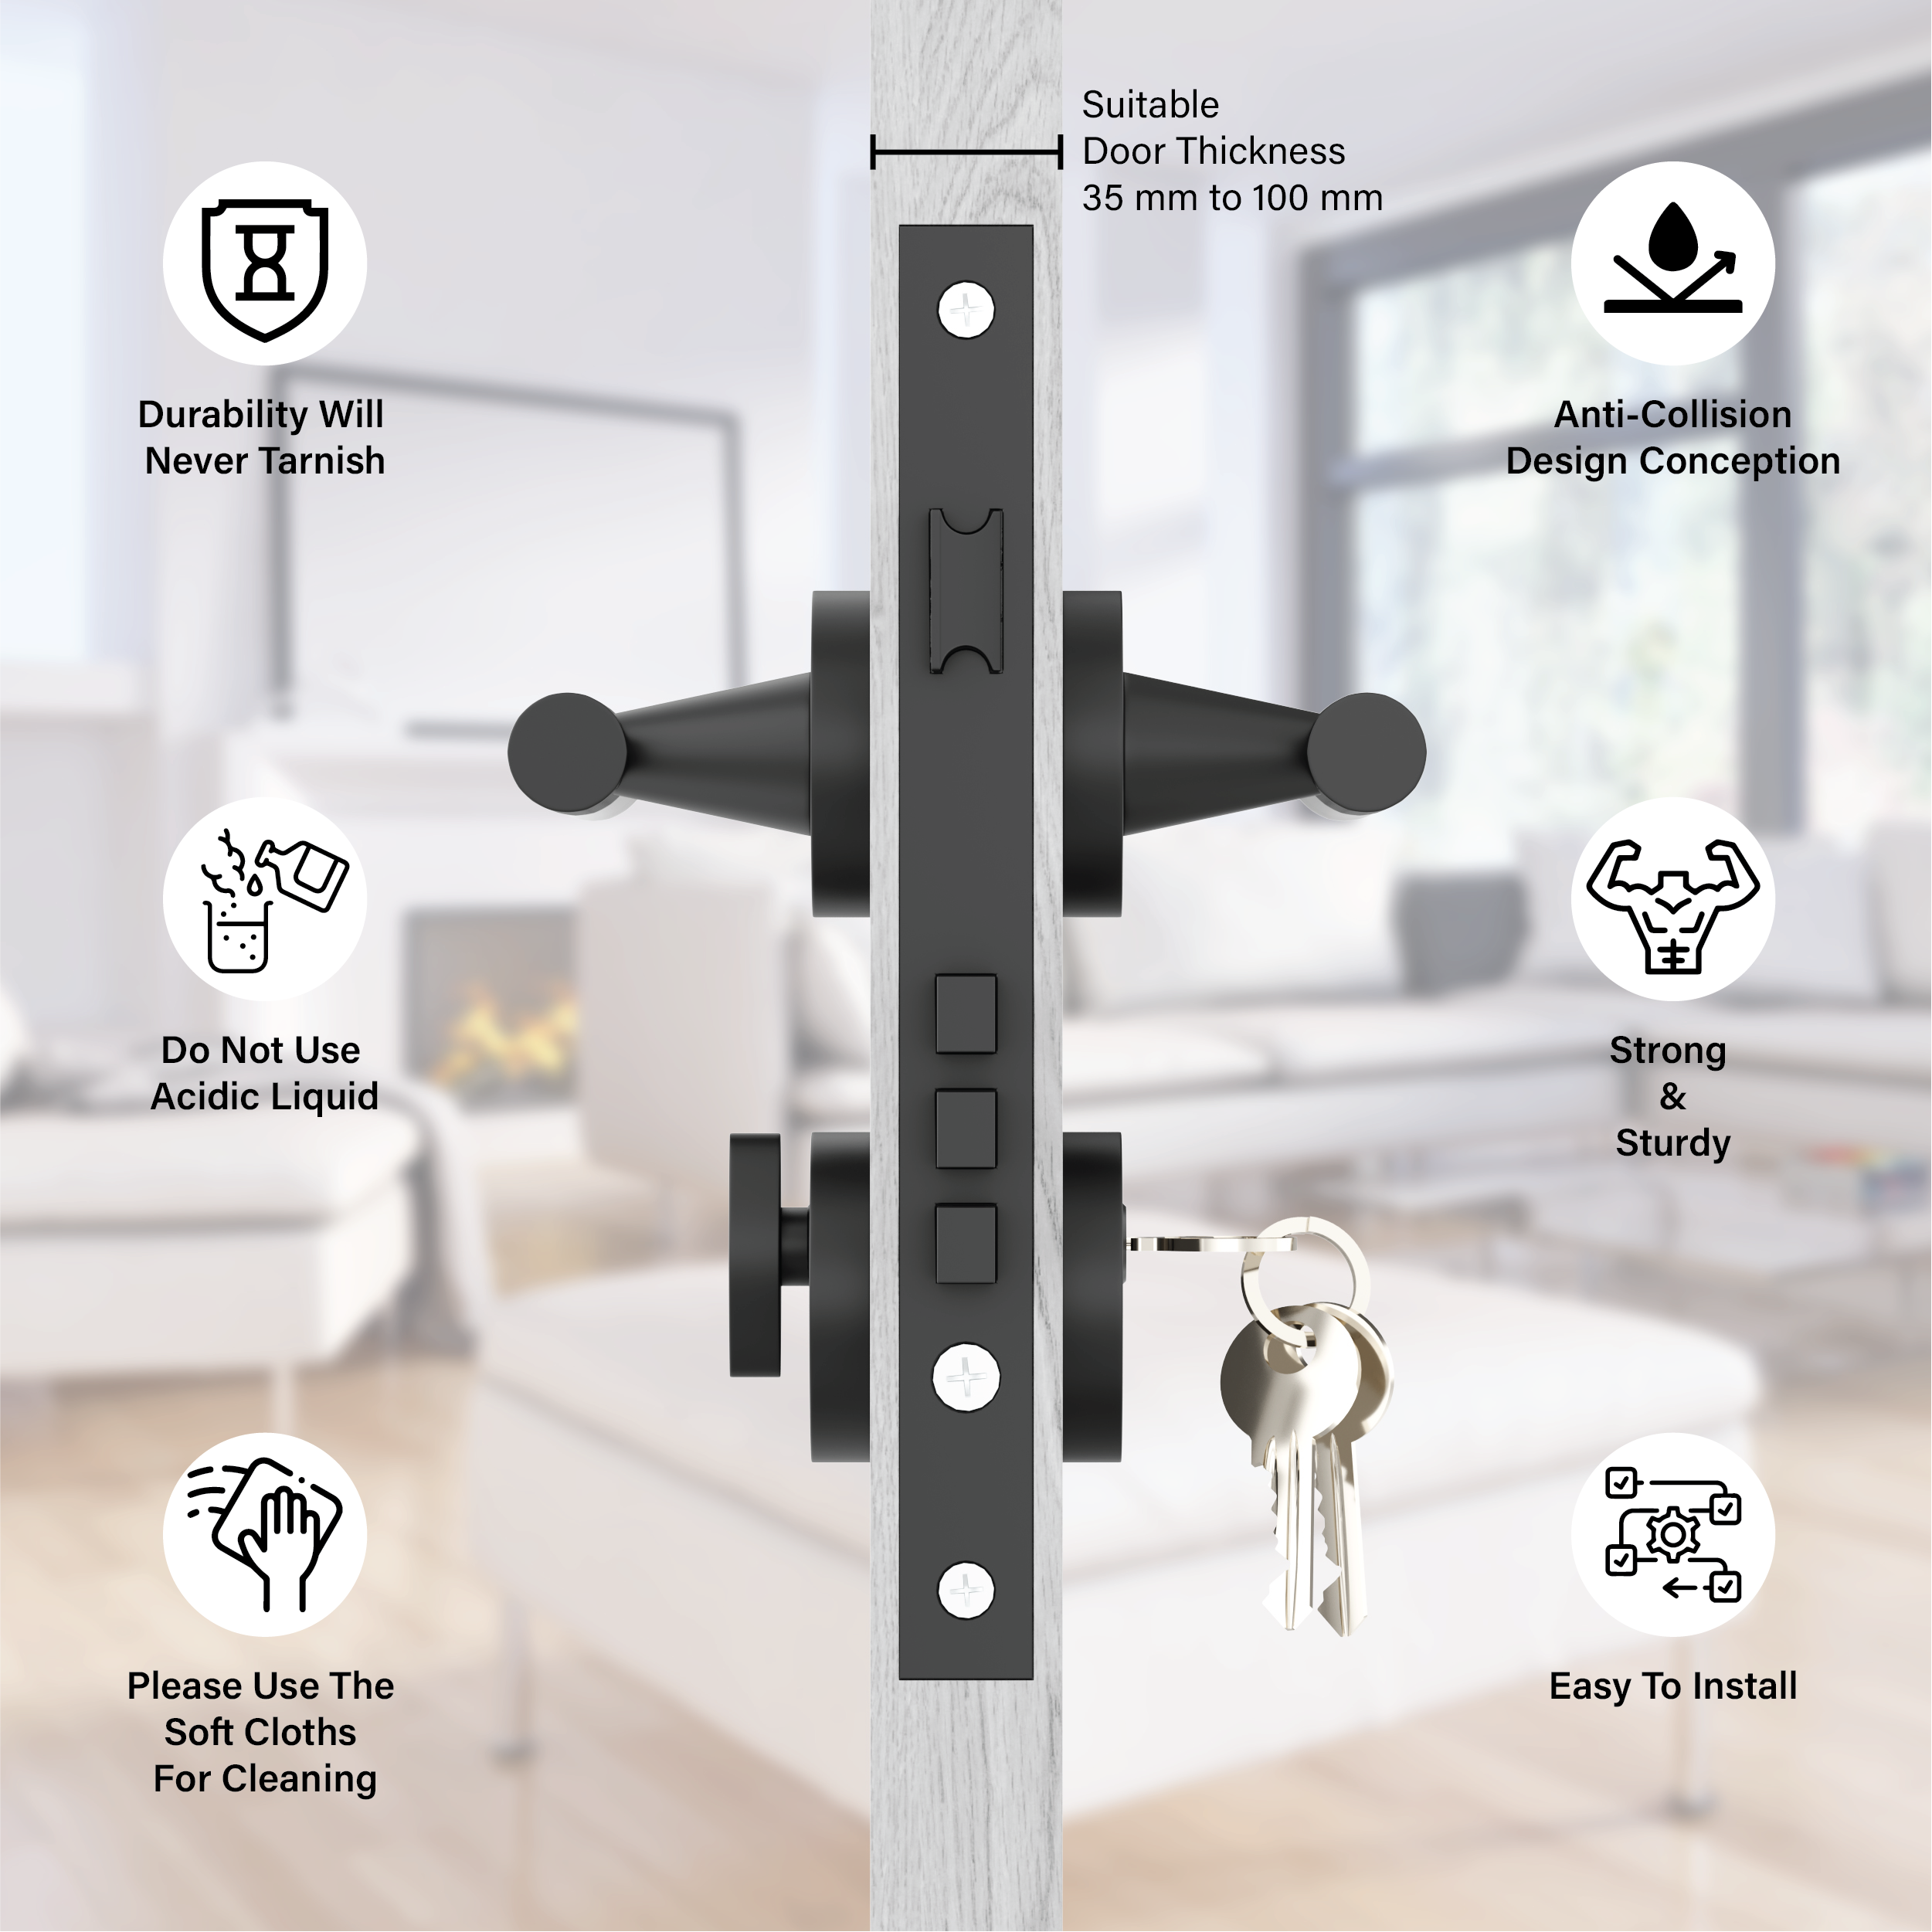 Mortise Door Handles Main Door Lock Handles Set with 3 Keys for Safety of Home | Bedroom, Office, Hotel, Home-by GLOXY®